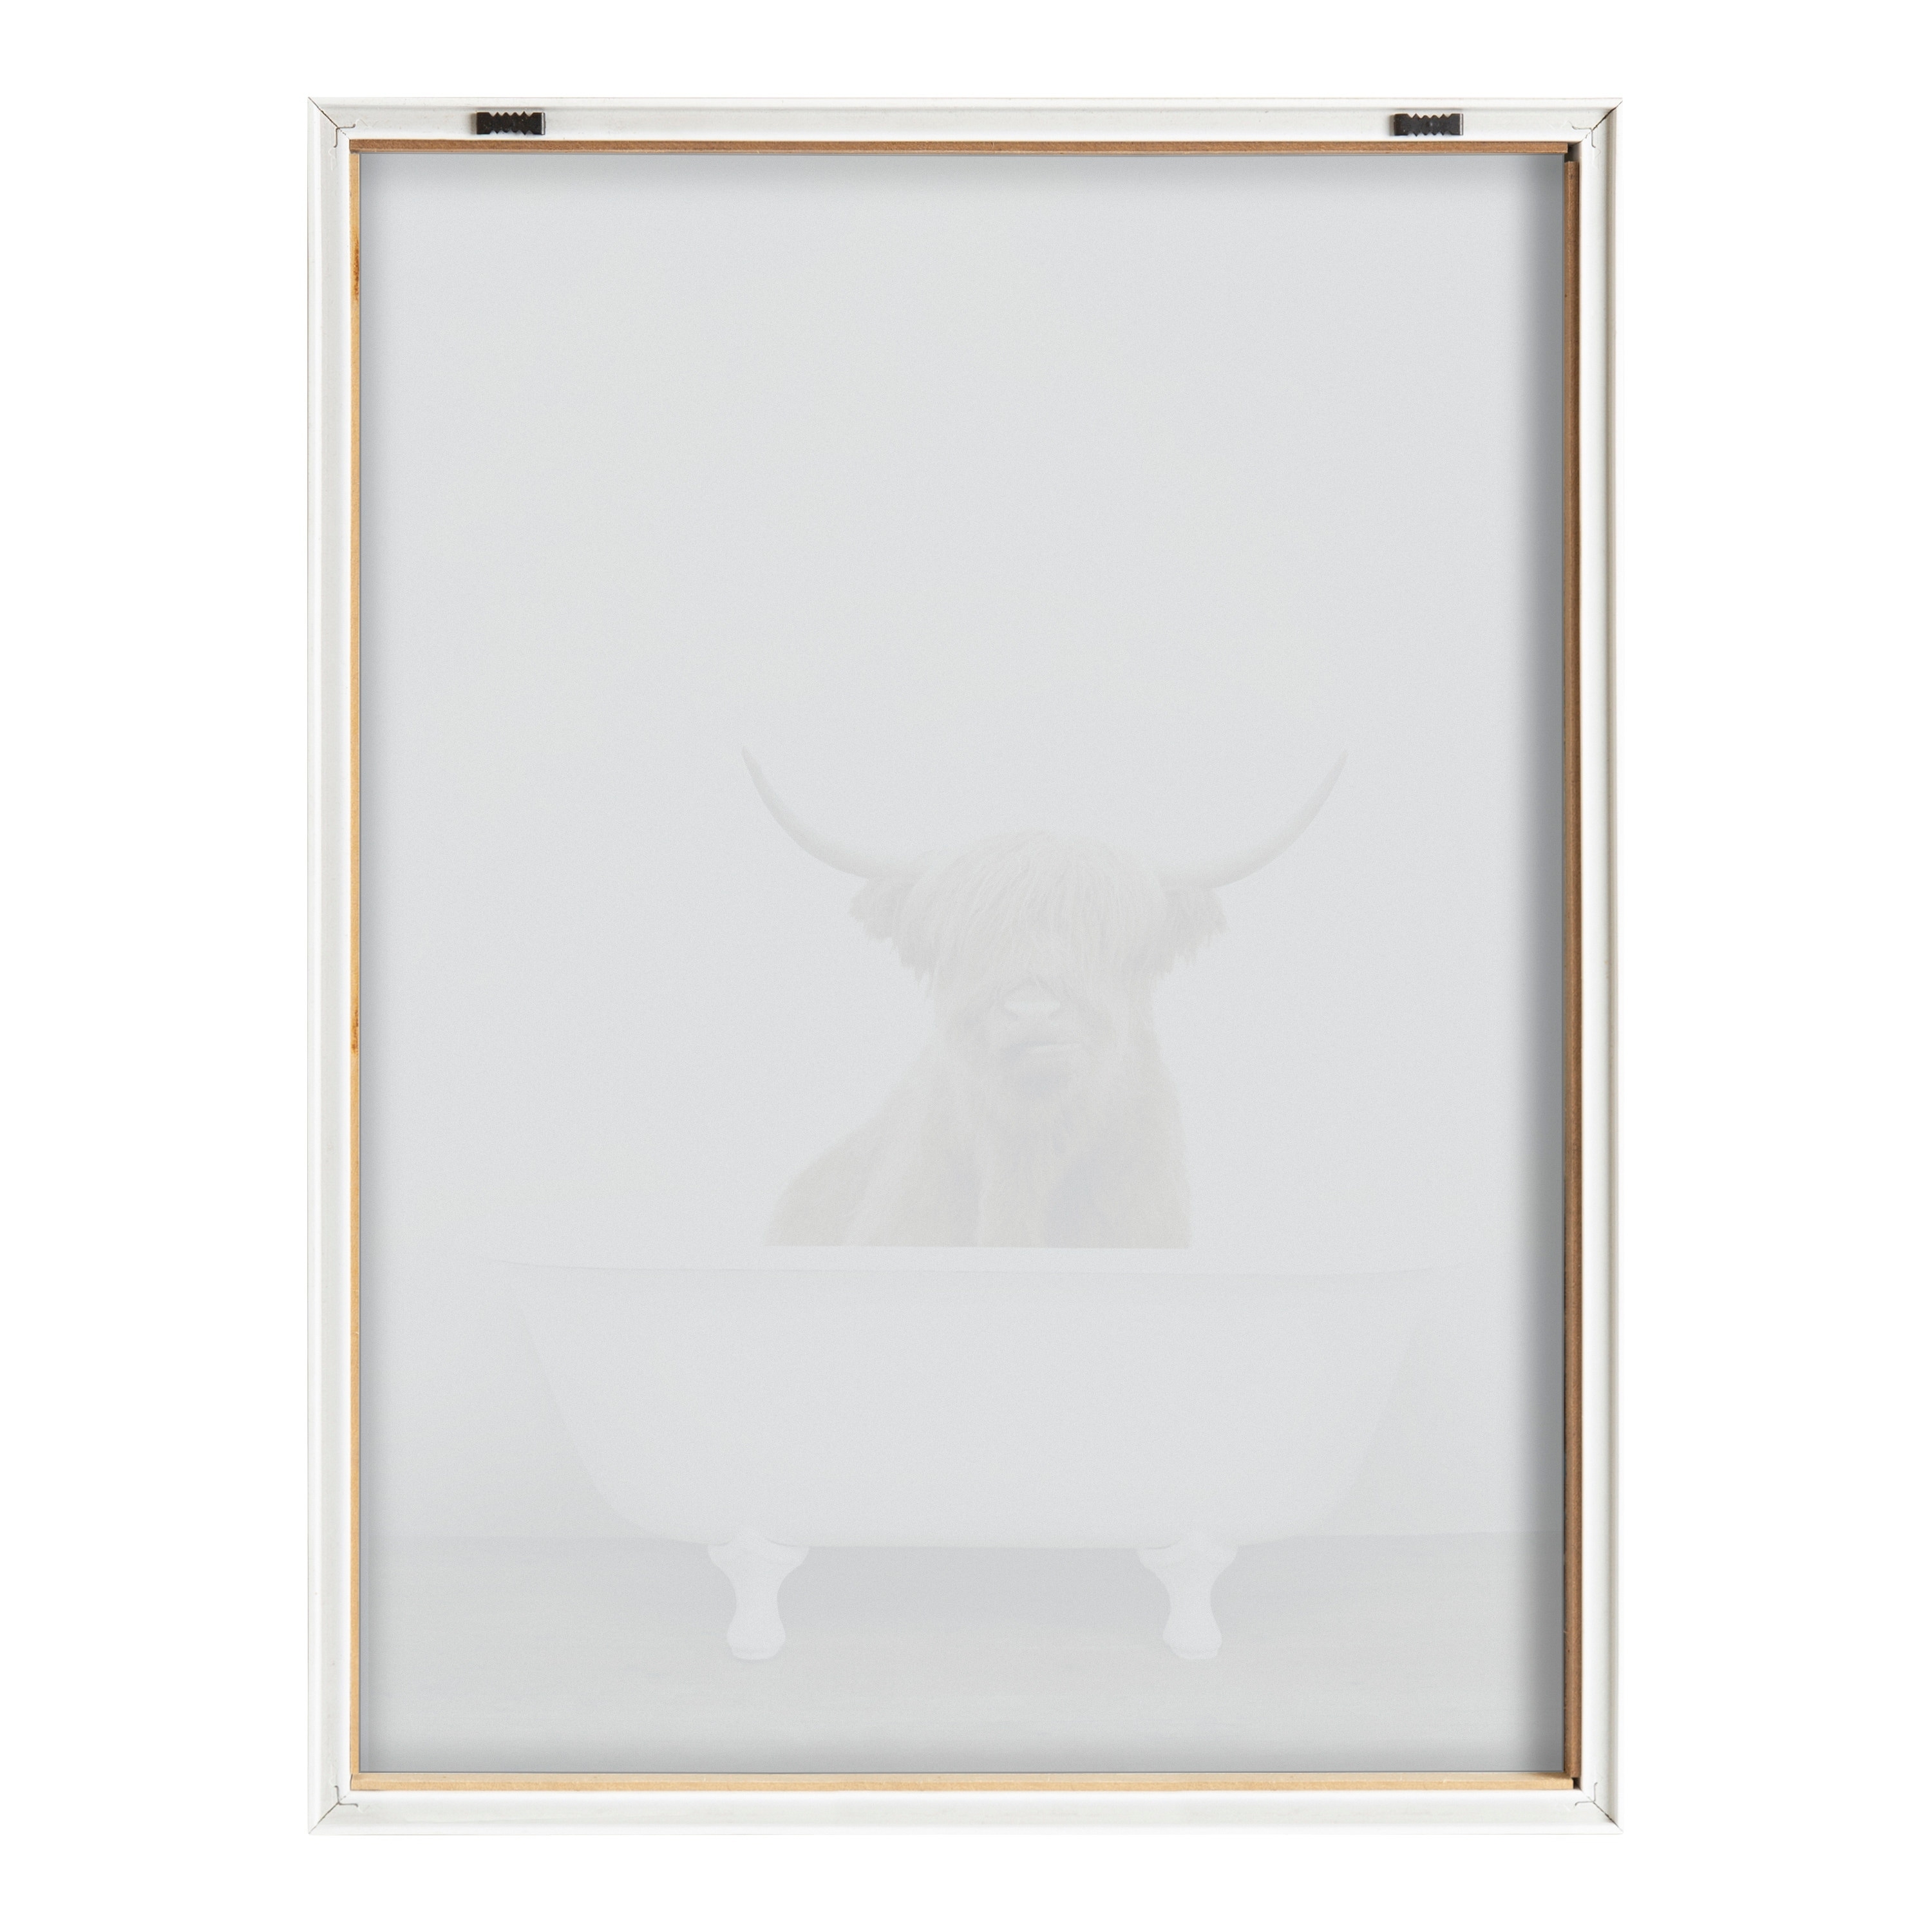 Kate and Laurel Blake Cow in Tub Framed Printed Glass by Amy Peterson On  Sale Bed Bath  Beyond 30669686